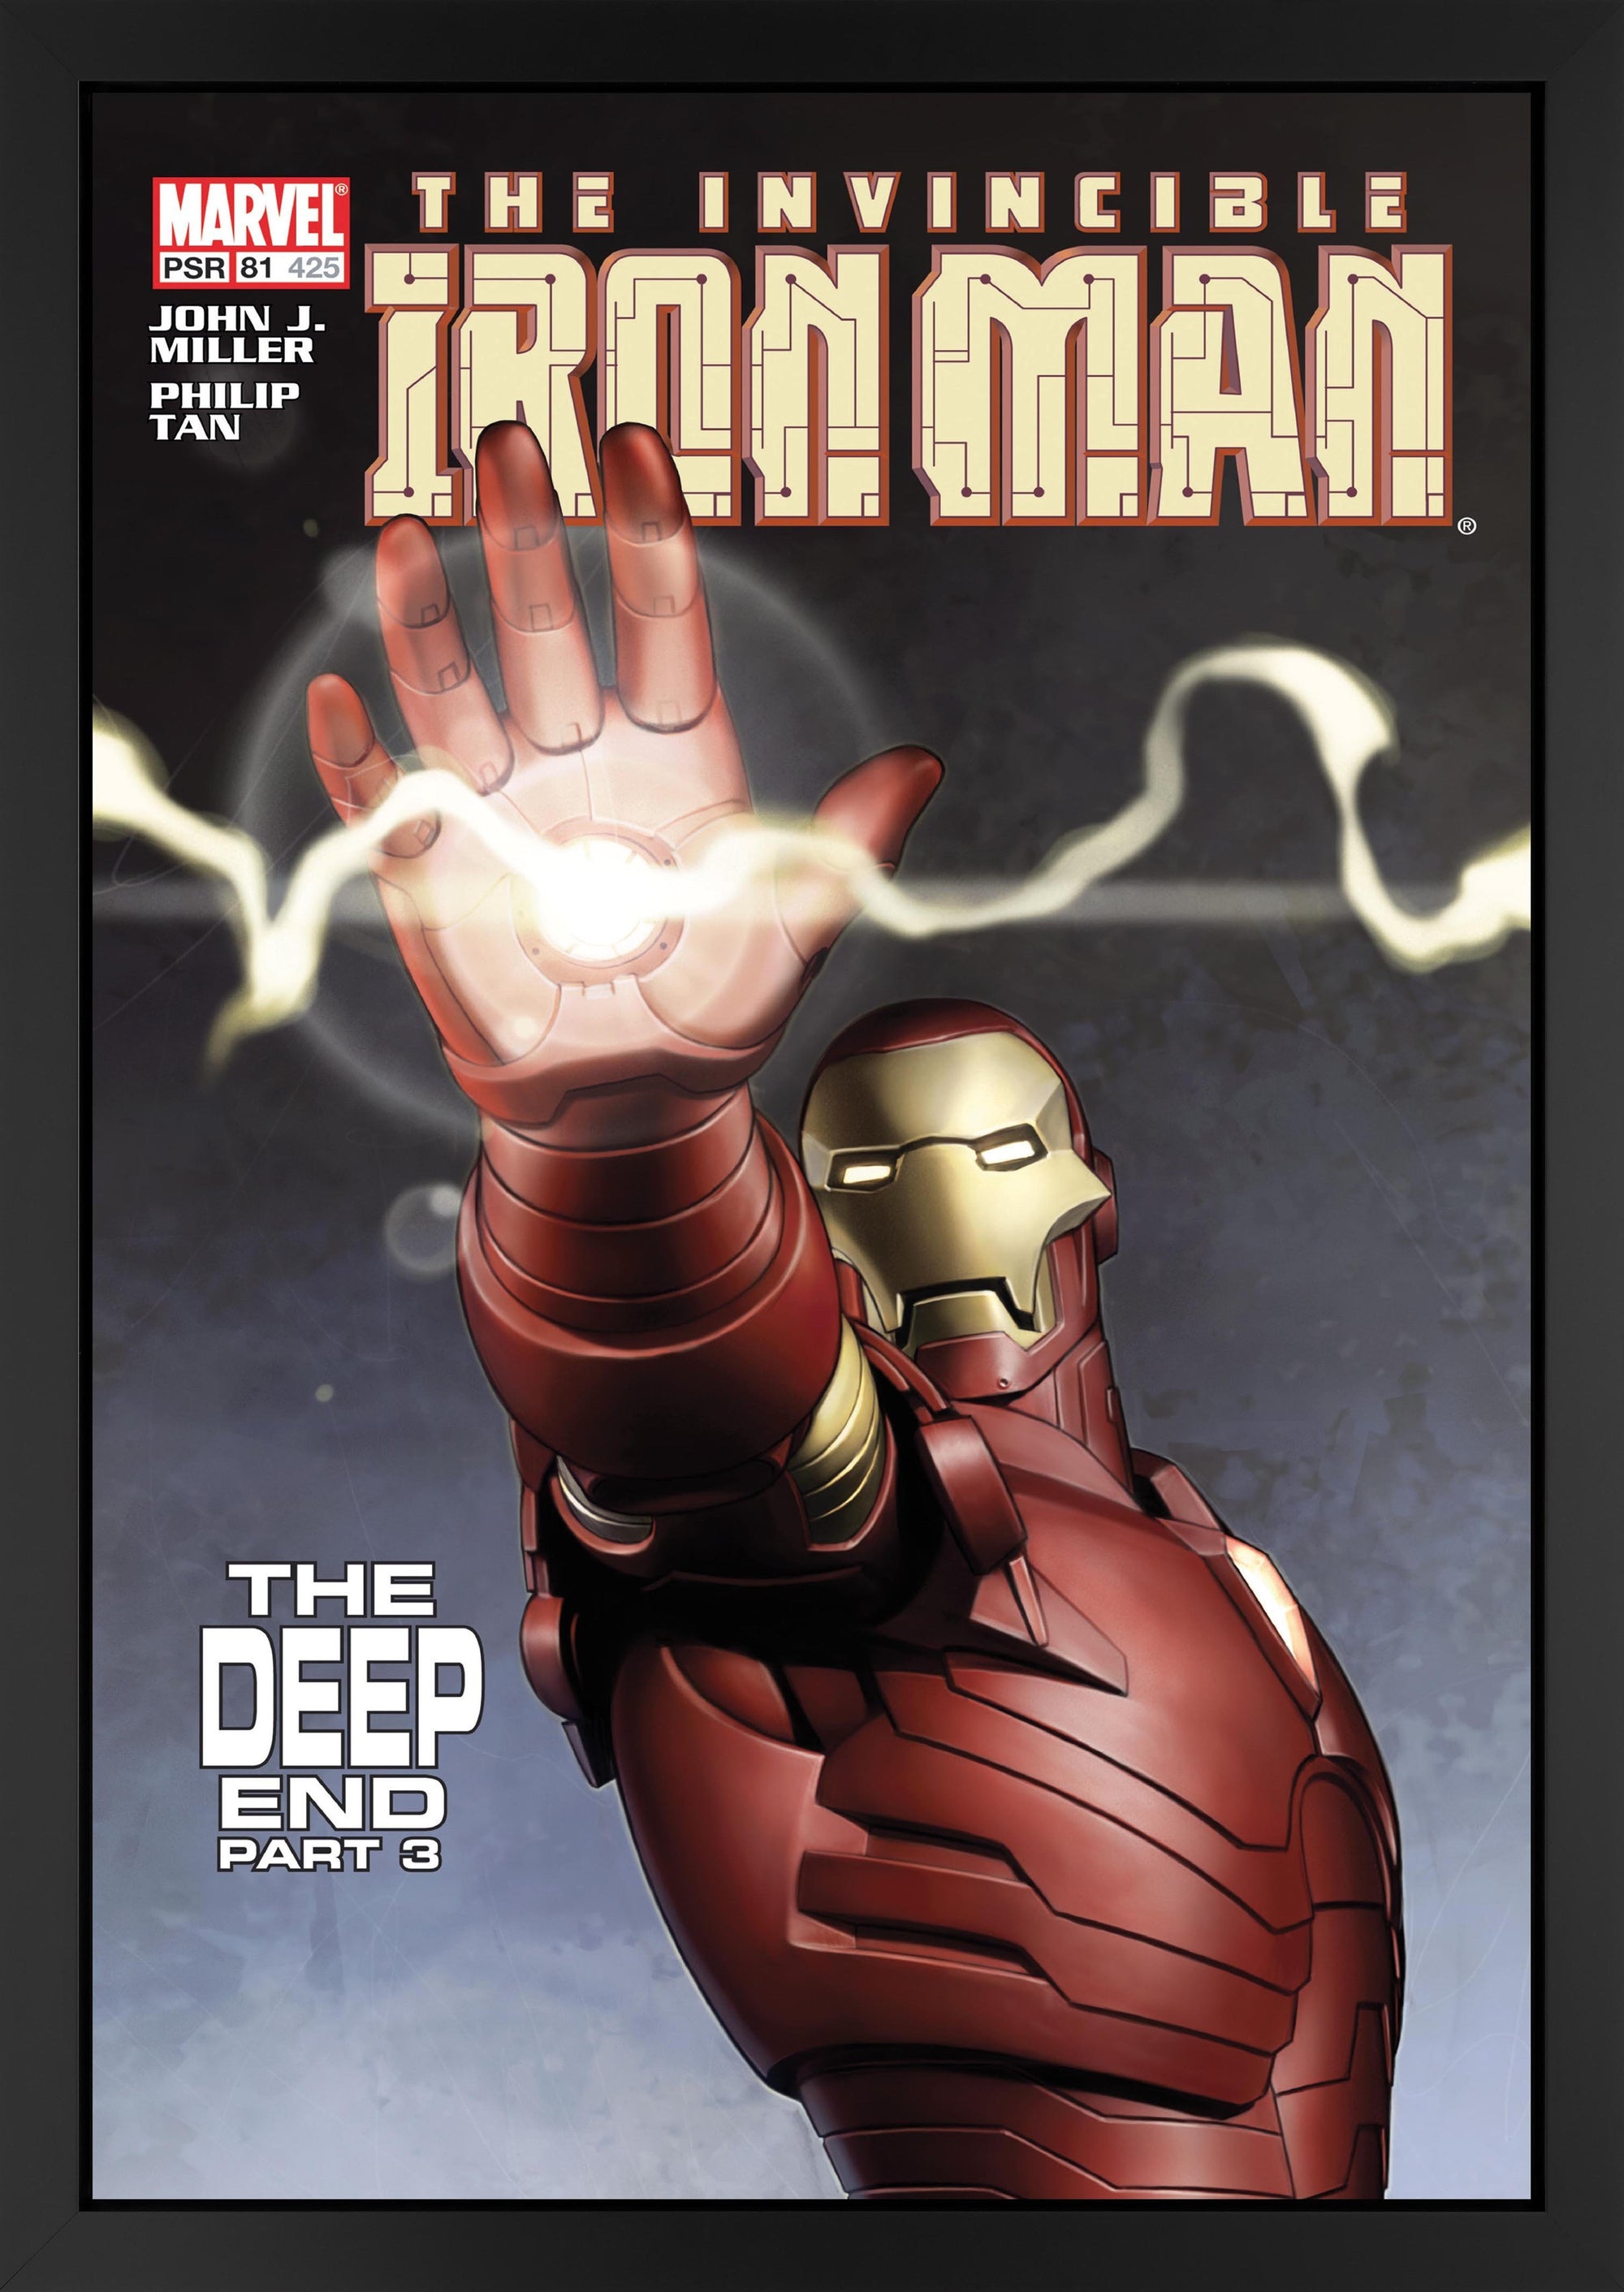 The Invincible Iron Man #81- The Deep End Part 3 - 2017 Stan Lee